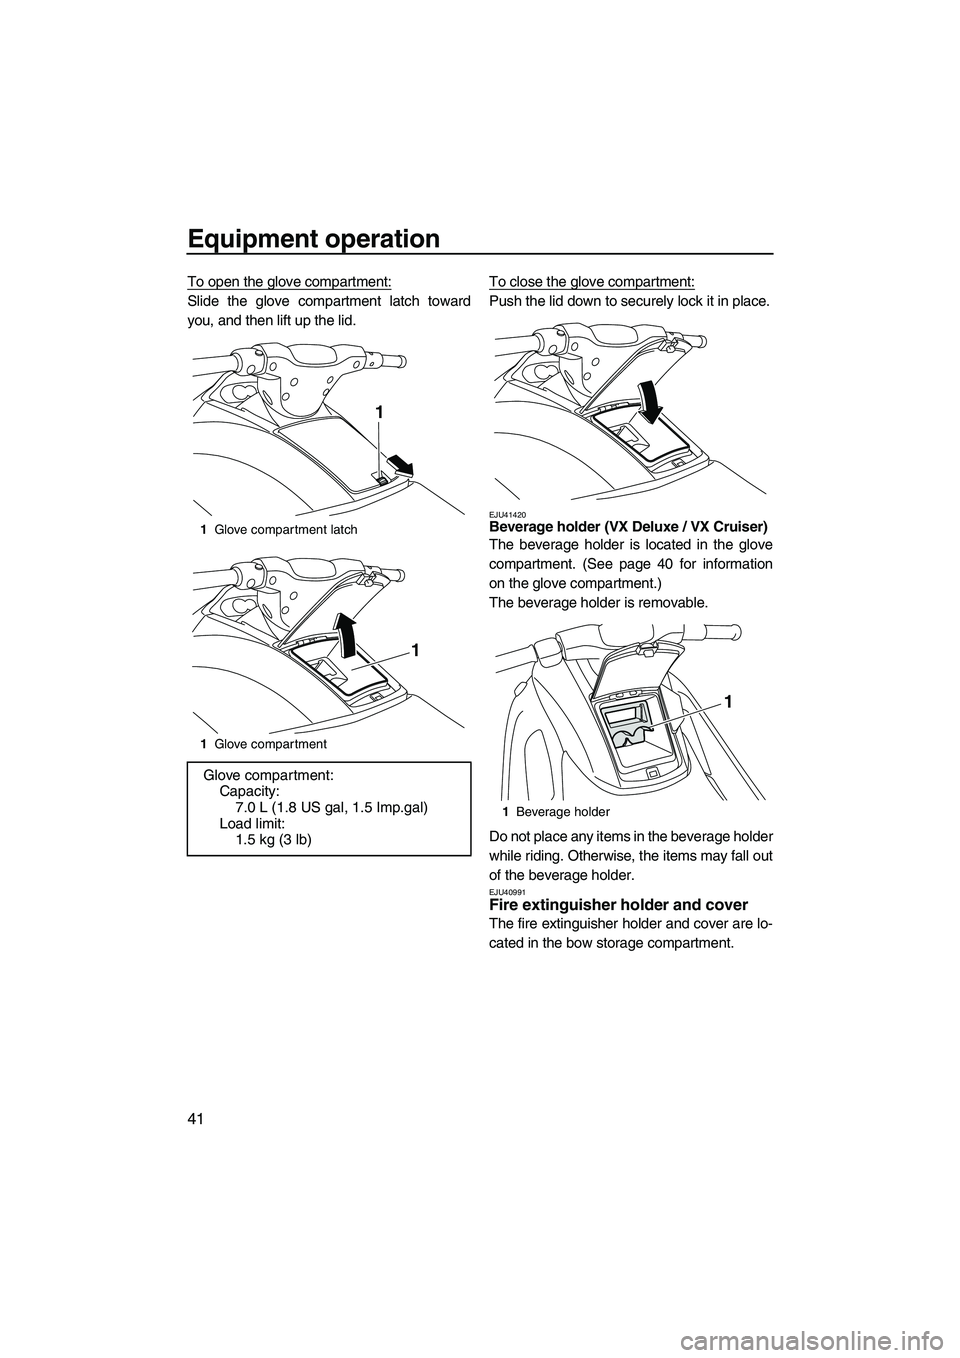 YAMAHA VX SPORT 2010 Service Manual Equipment operation
41
To open the glove compartment:
Slide the glove compartment latch toward
you, and then lift up the lid.To close the glove compartment:Push the lid down to securely lock it in pla